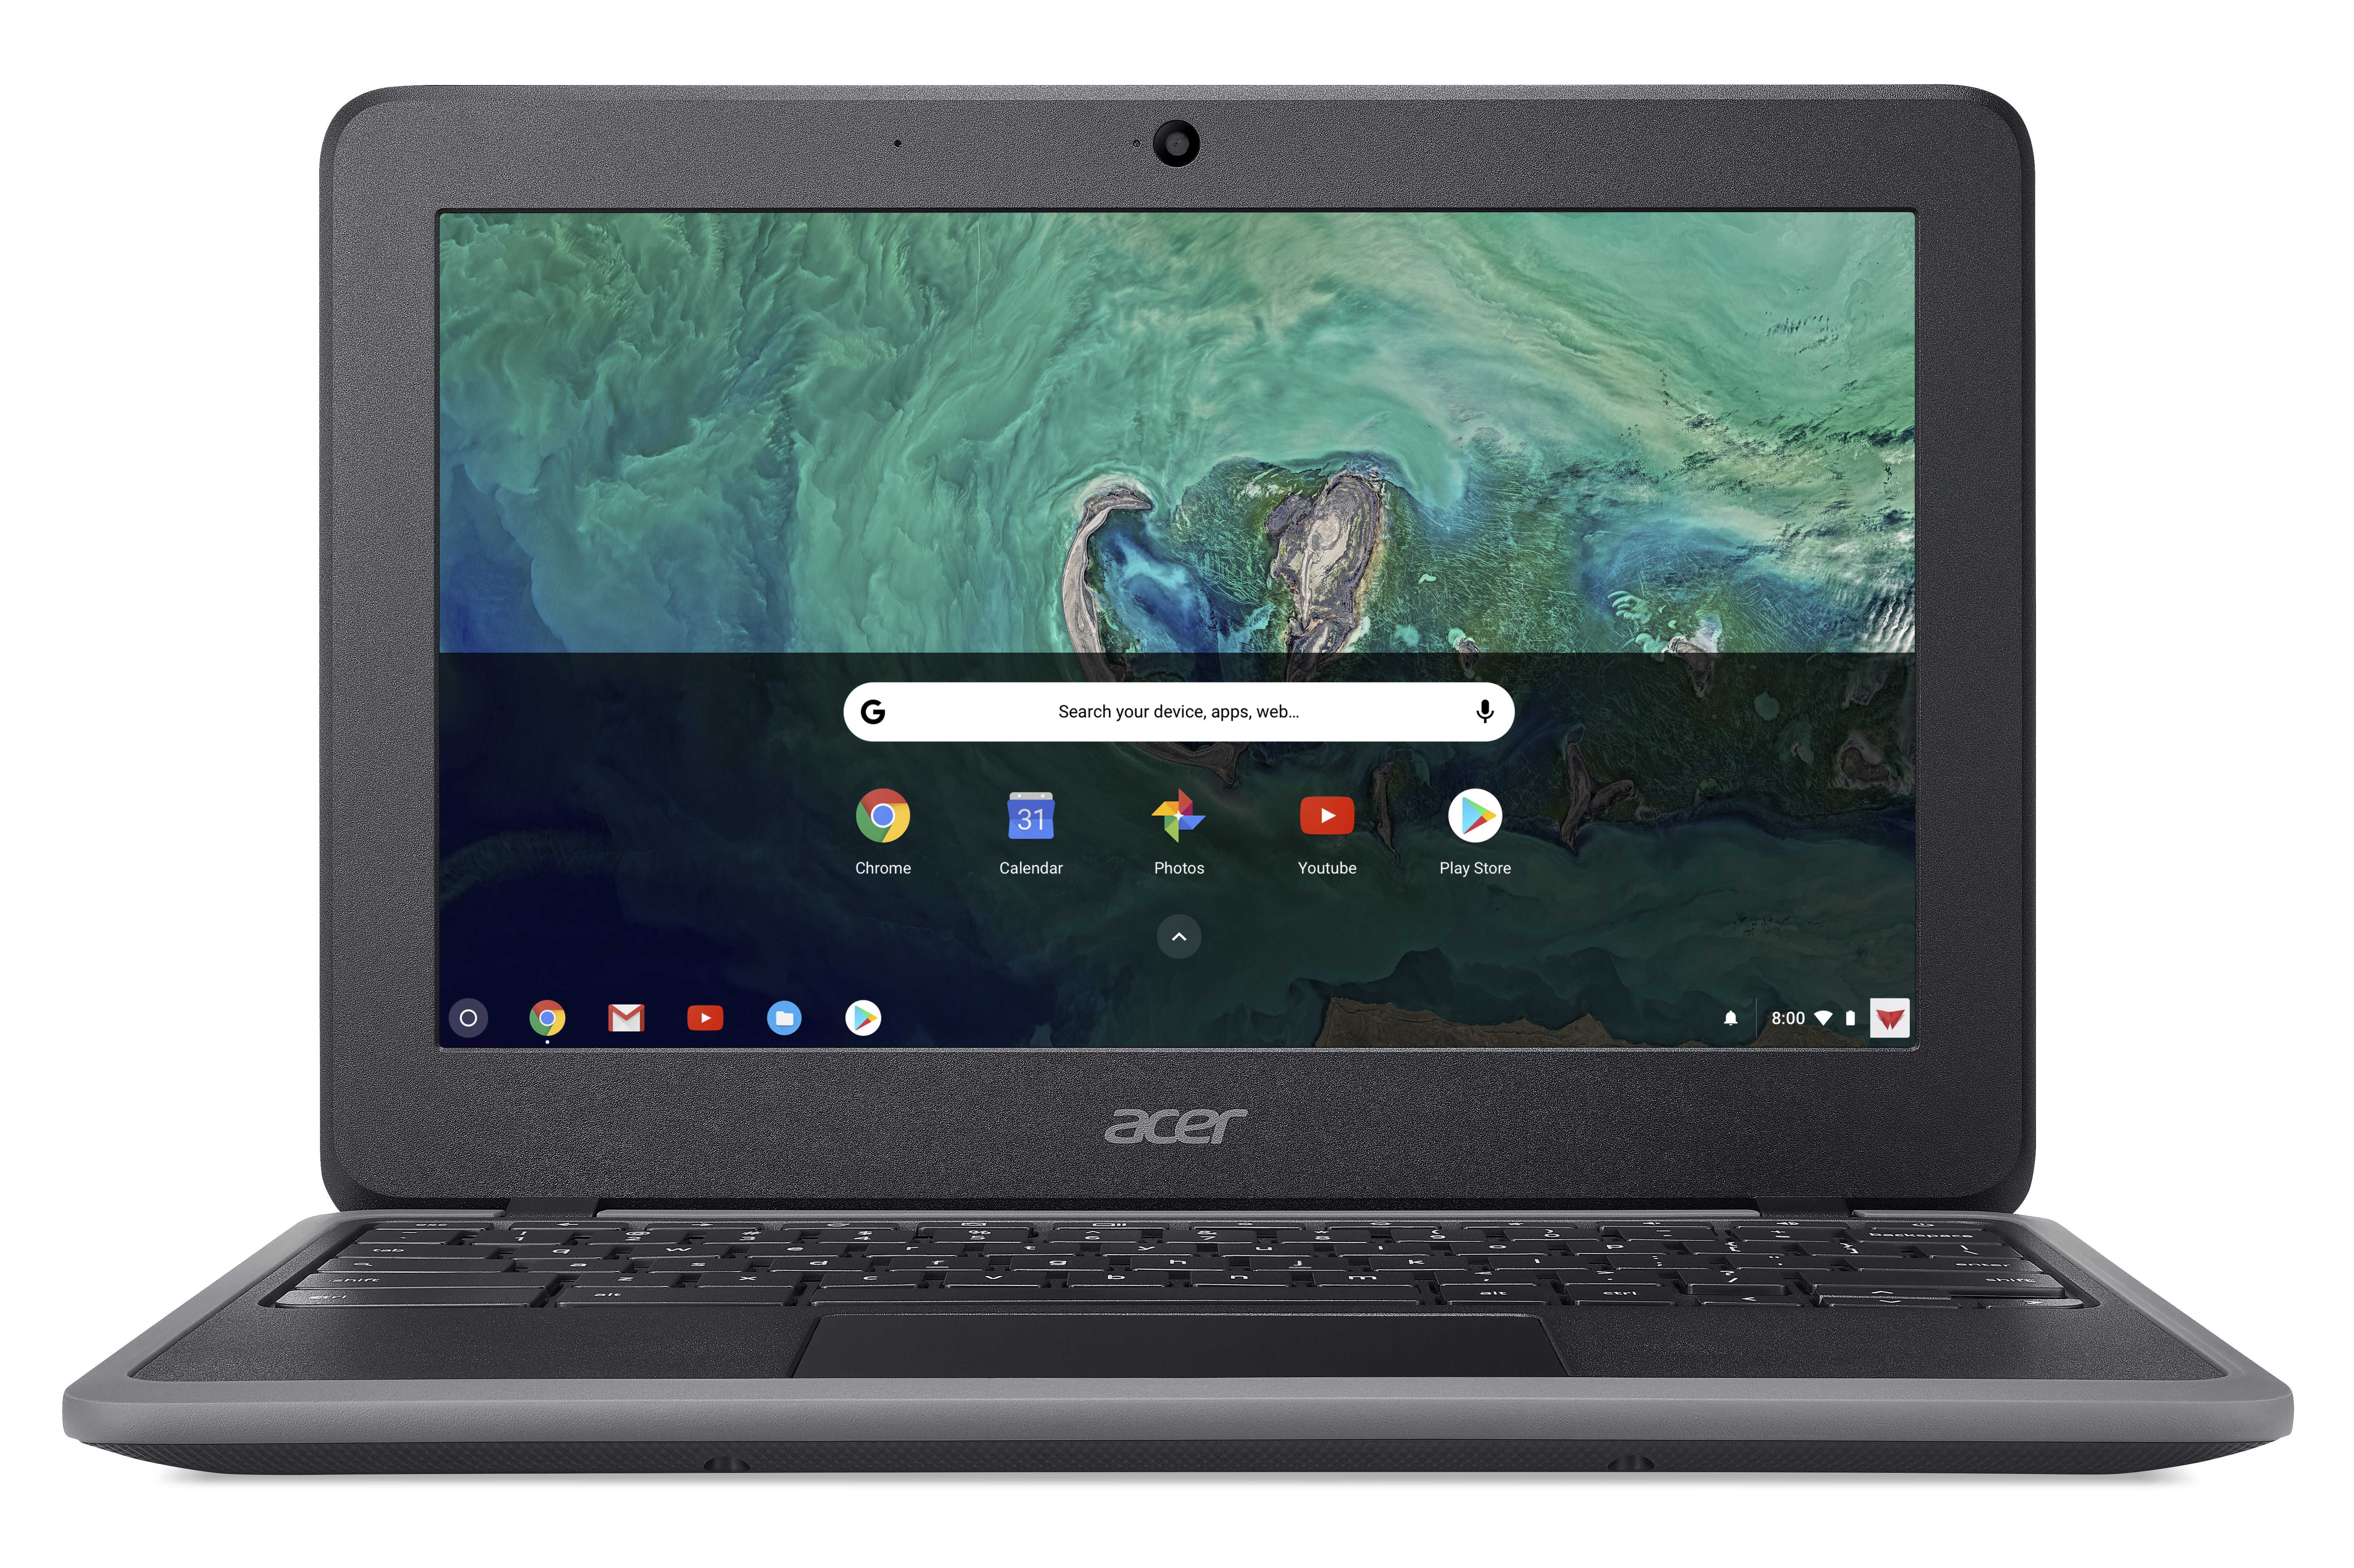 Triplenet Pricing Acer Chromebook 11 C732t C8vy 1 1ghz N3350